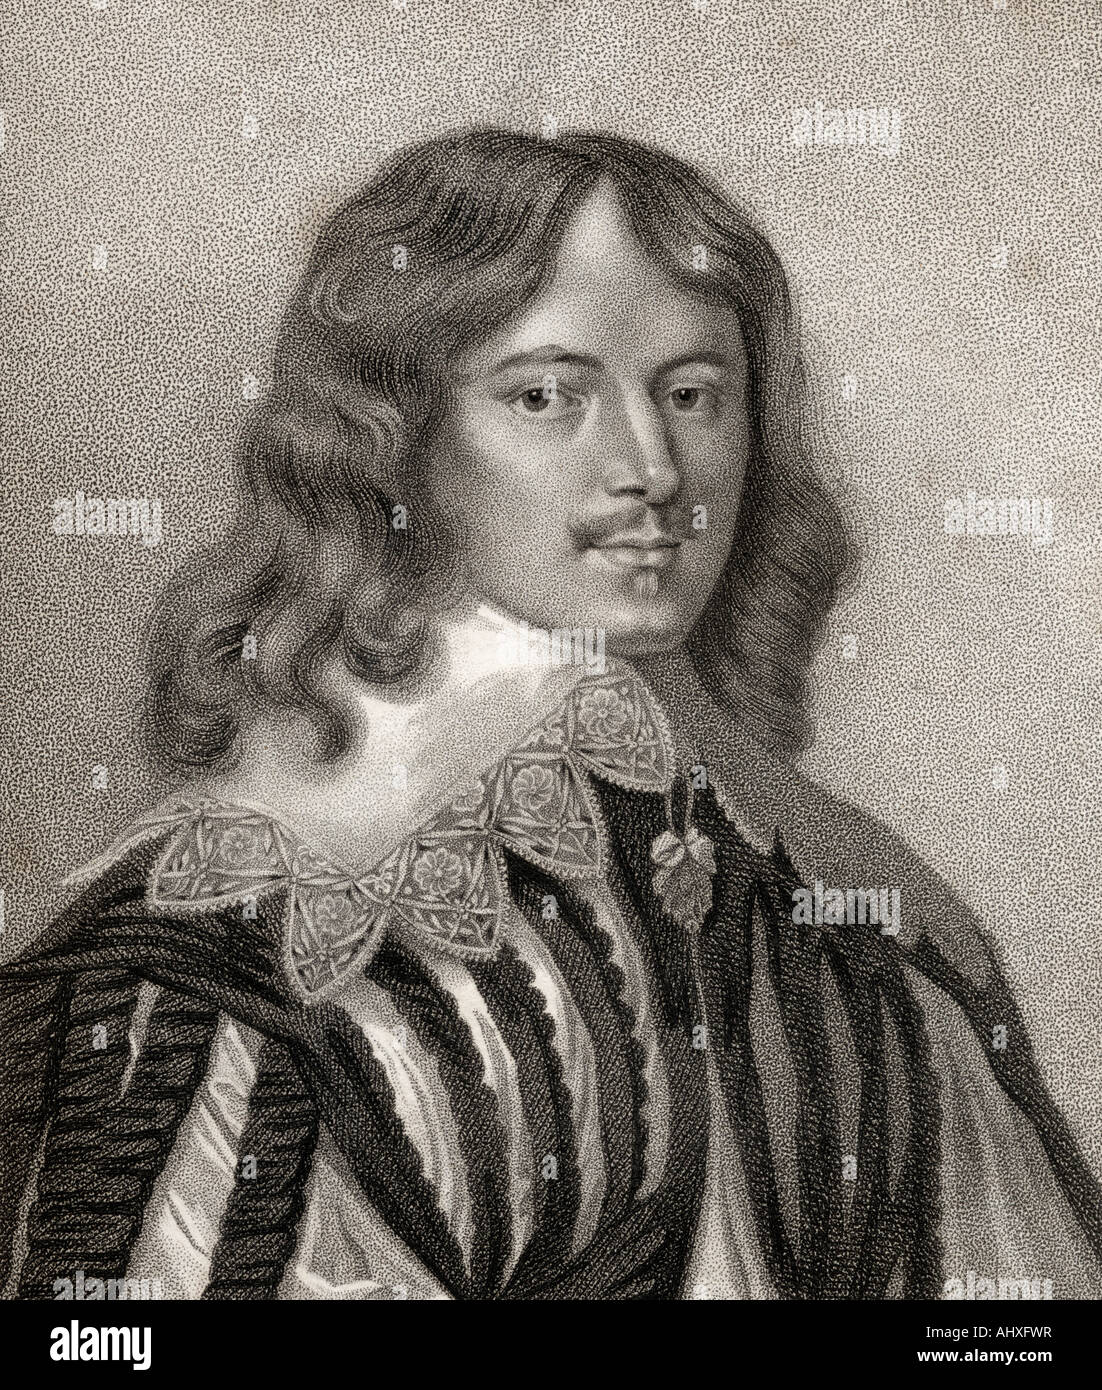 Lucius Cary 2nd Viscount Falkland Stock Photo: 14562658 - Alamy